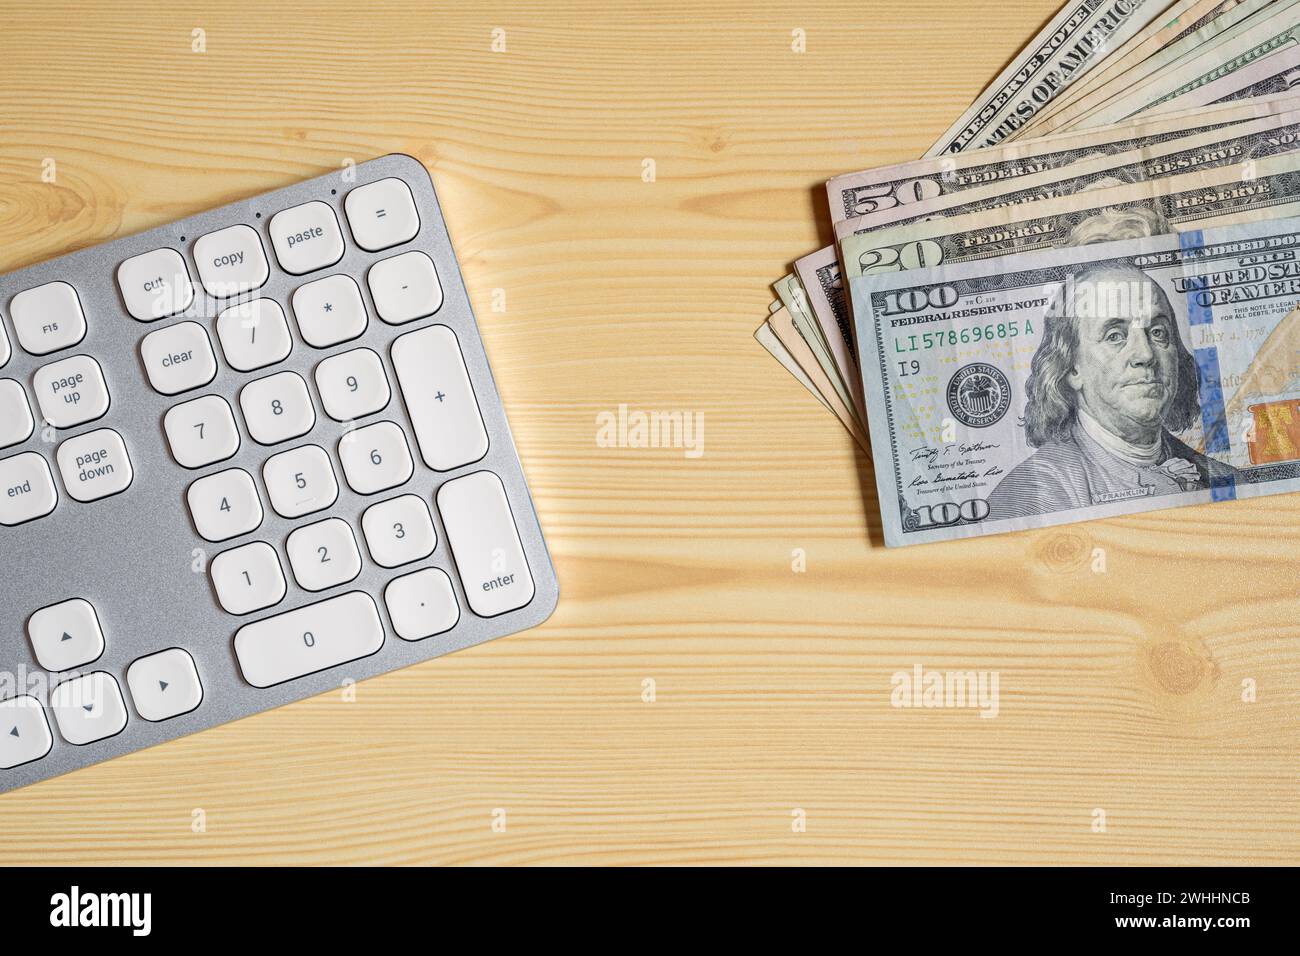 Desktop PC computer keyboard and American Dollar currency banknotes on office desk, top view Stock Photo